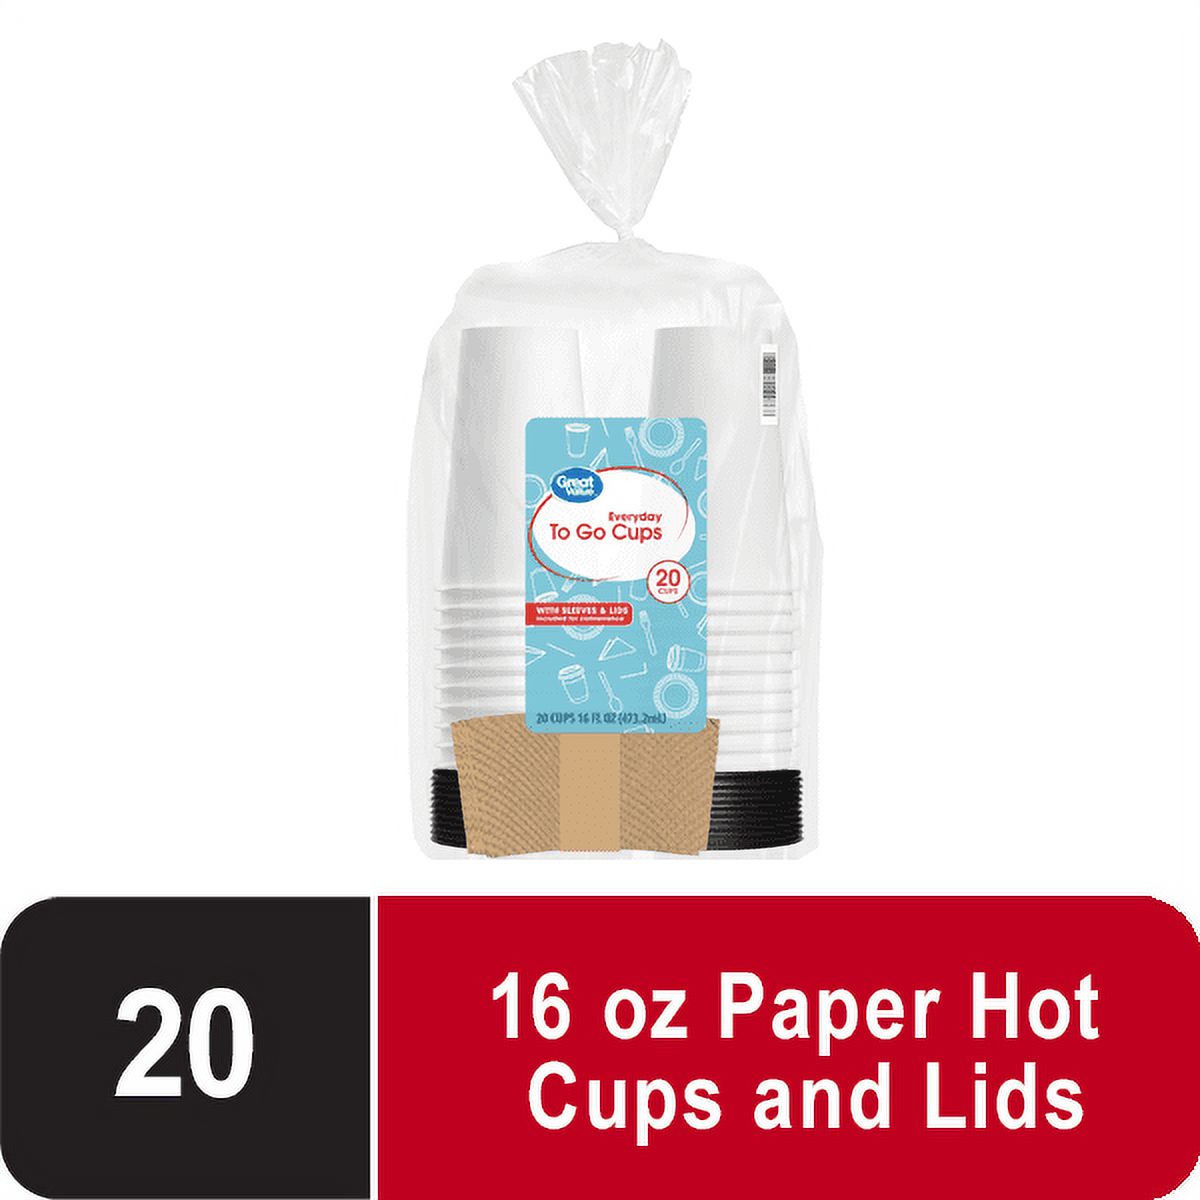 Great Value Everyday to Go Cups, Lids & Sleeves, 16 fl oz, 20 Count - image 1 of 9